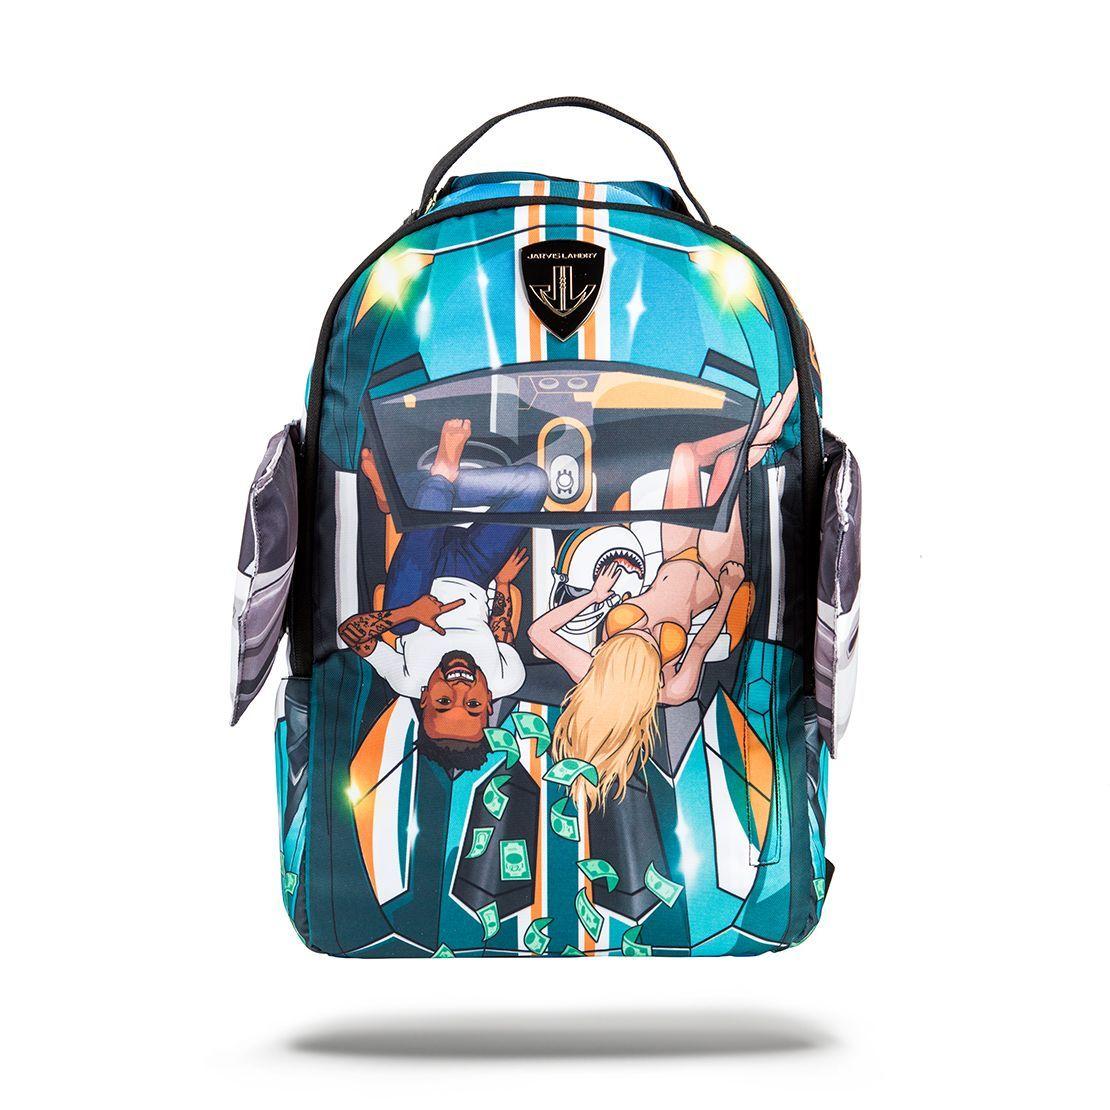 Swag Bags: NFL Stars Launch Exclusive Sprayground Backpacks